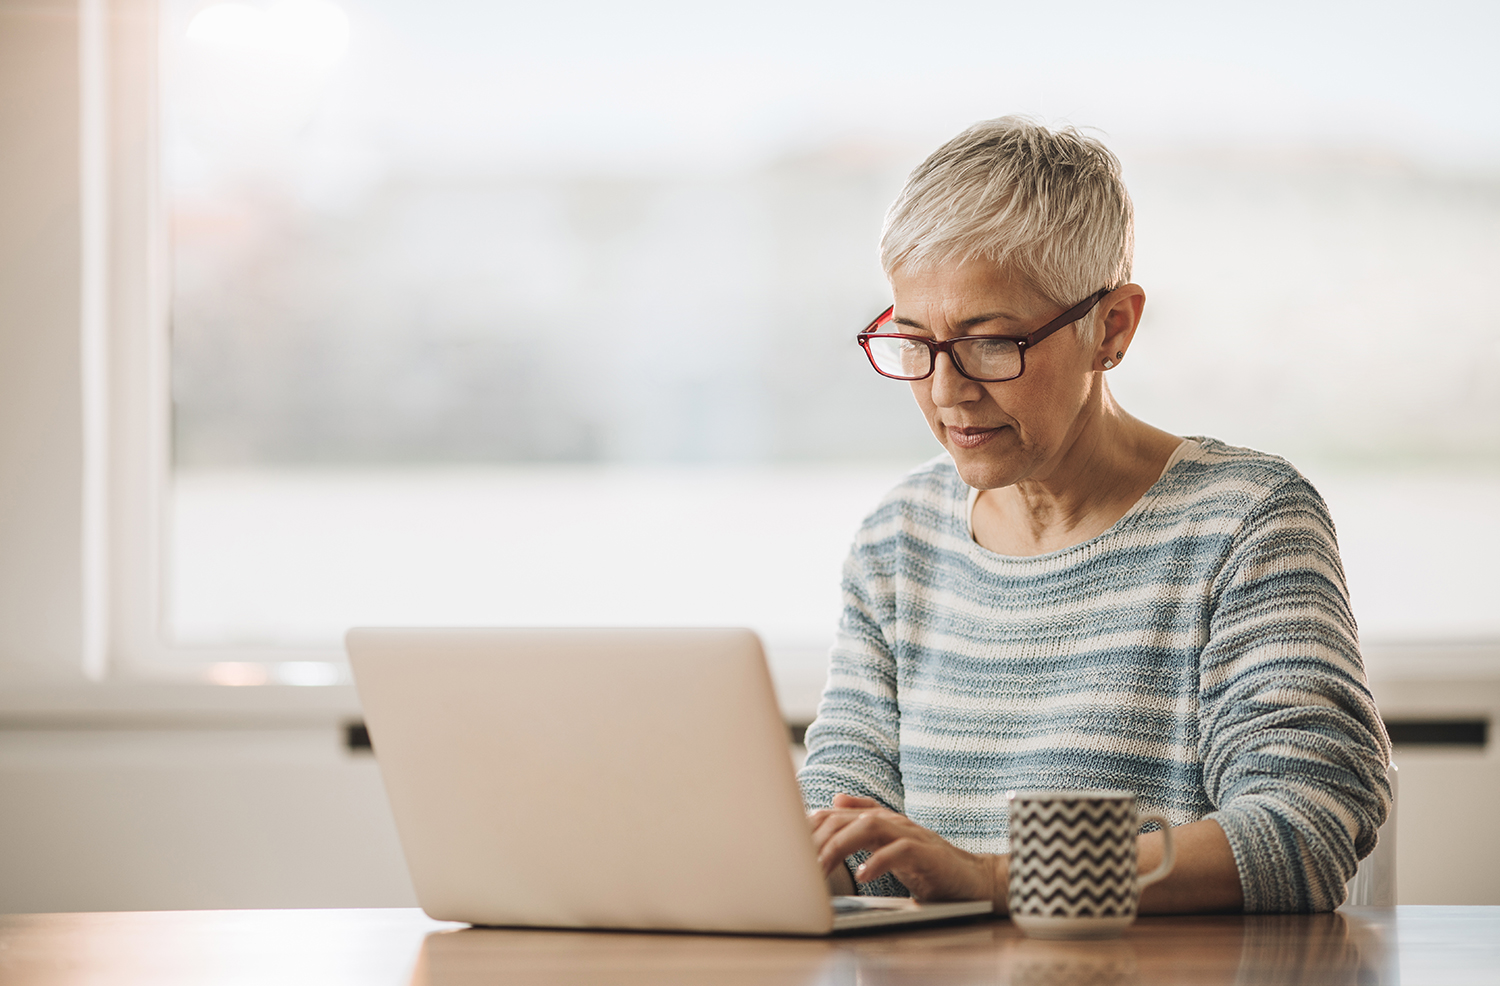 Coffee cup near at hand, a woman sits at a table and types on her laptop. The Alabama disability lawyer at The Clarkson Firm treats you like a person who deserves respect, not a case file.